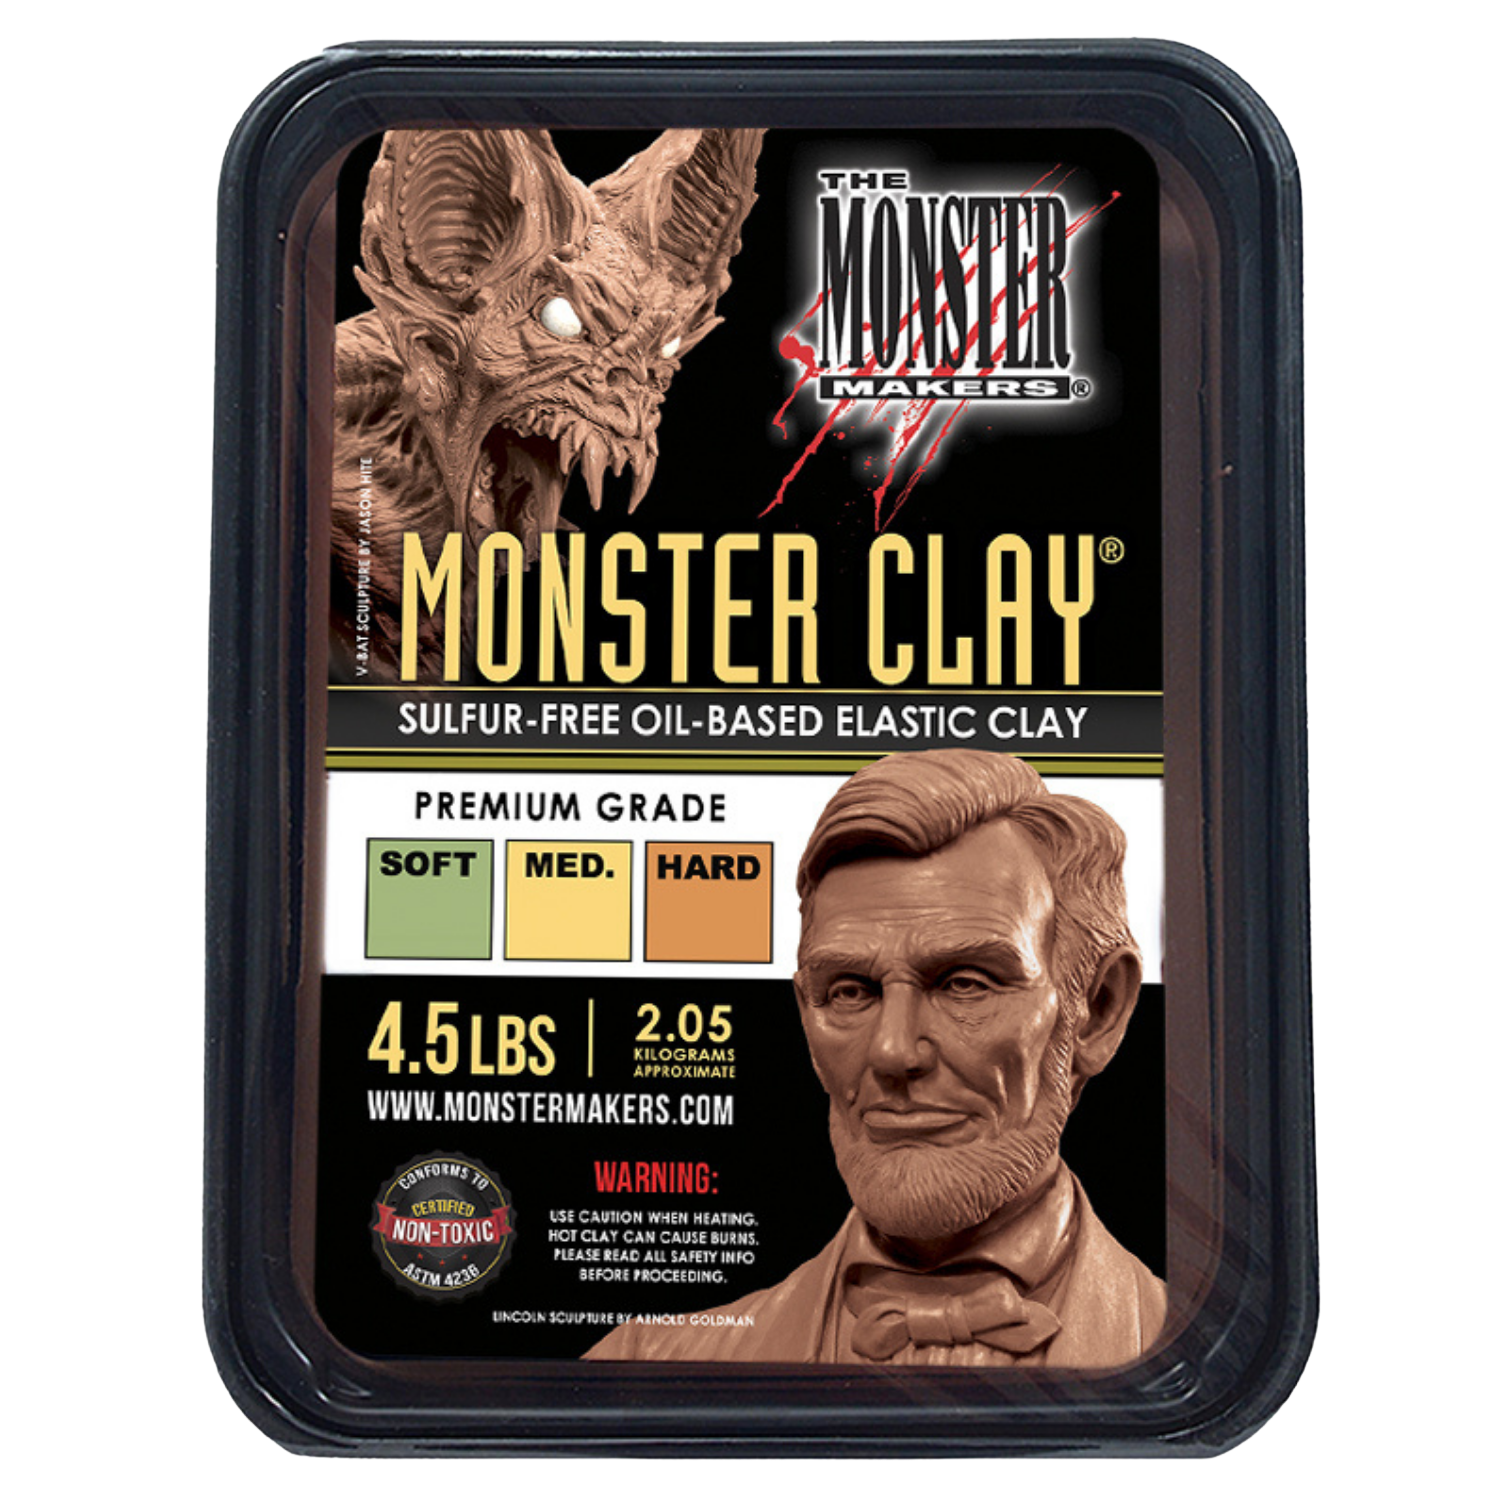 Modelling Clay & Sculpting Clay NZ